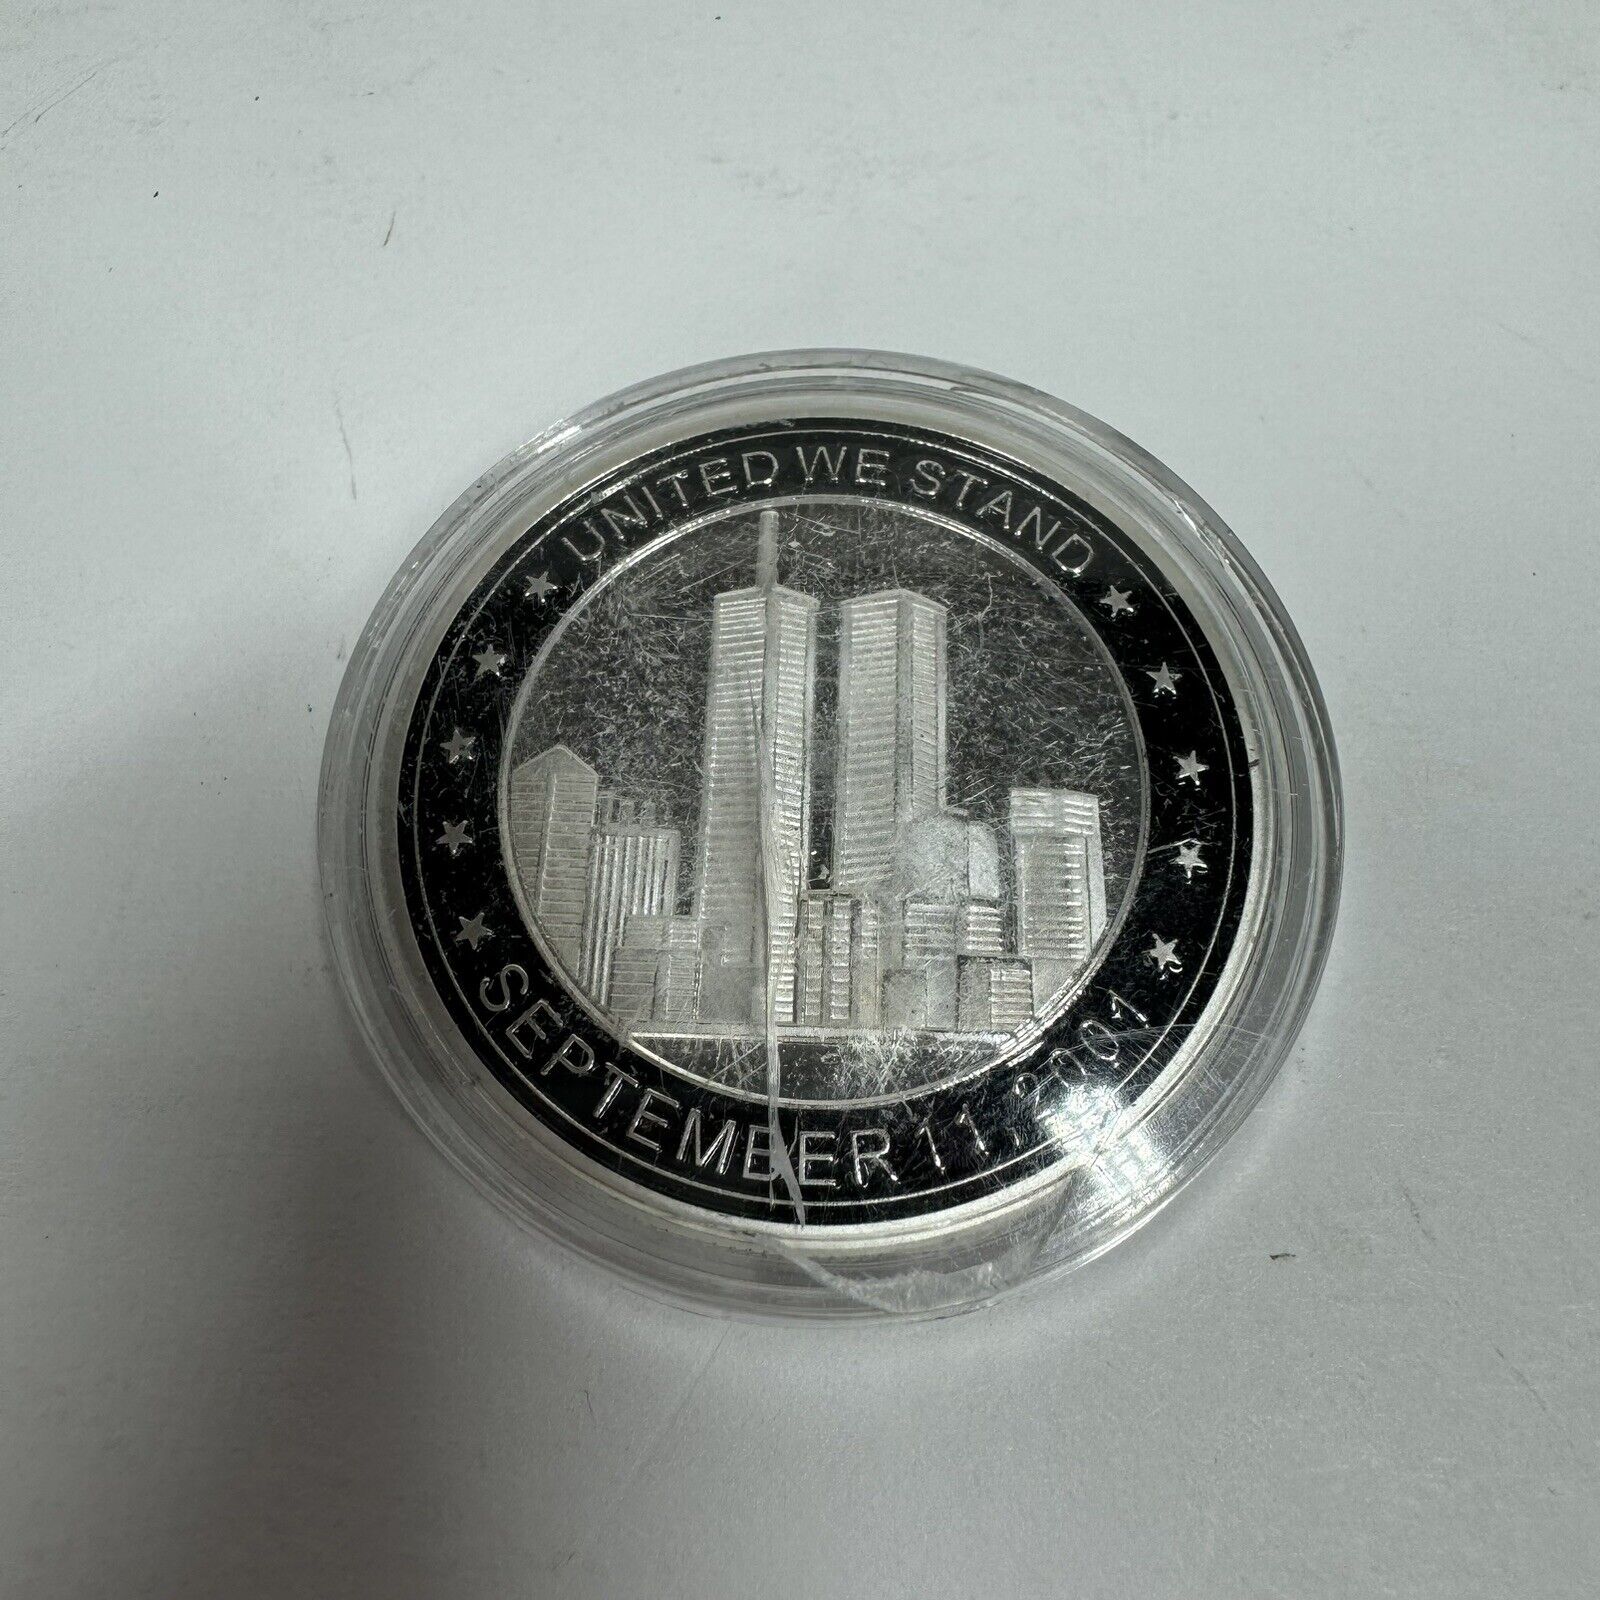 9/11 United We Stand September 11 2001 Coin